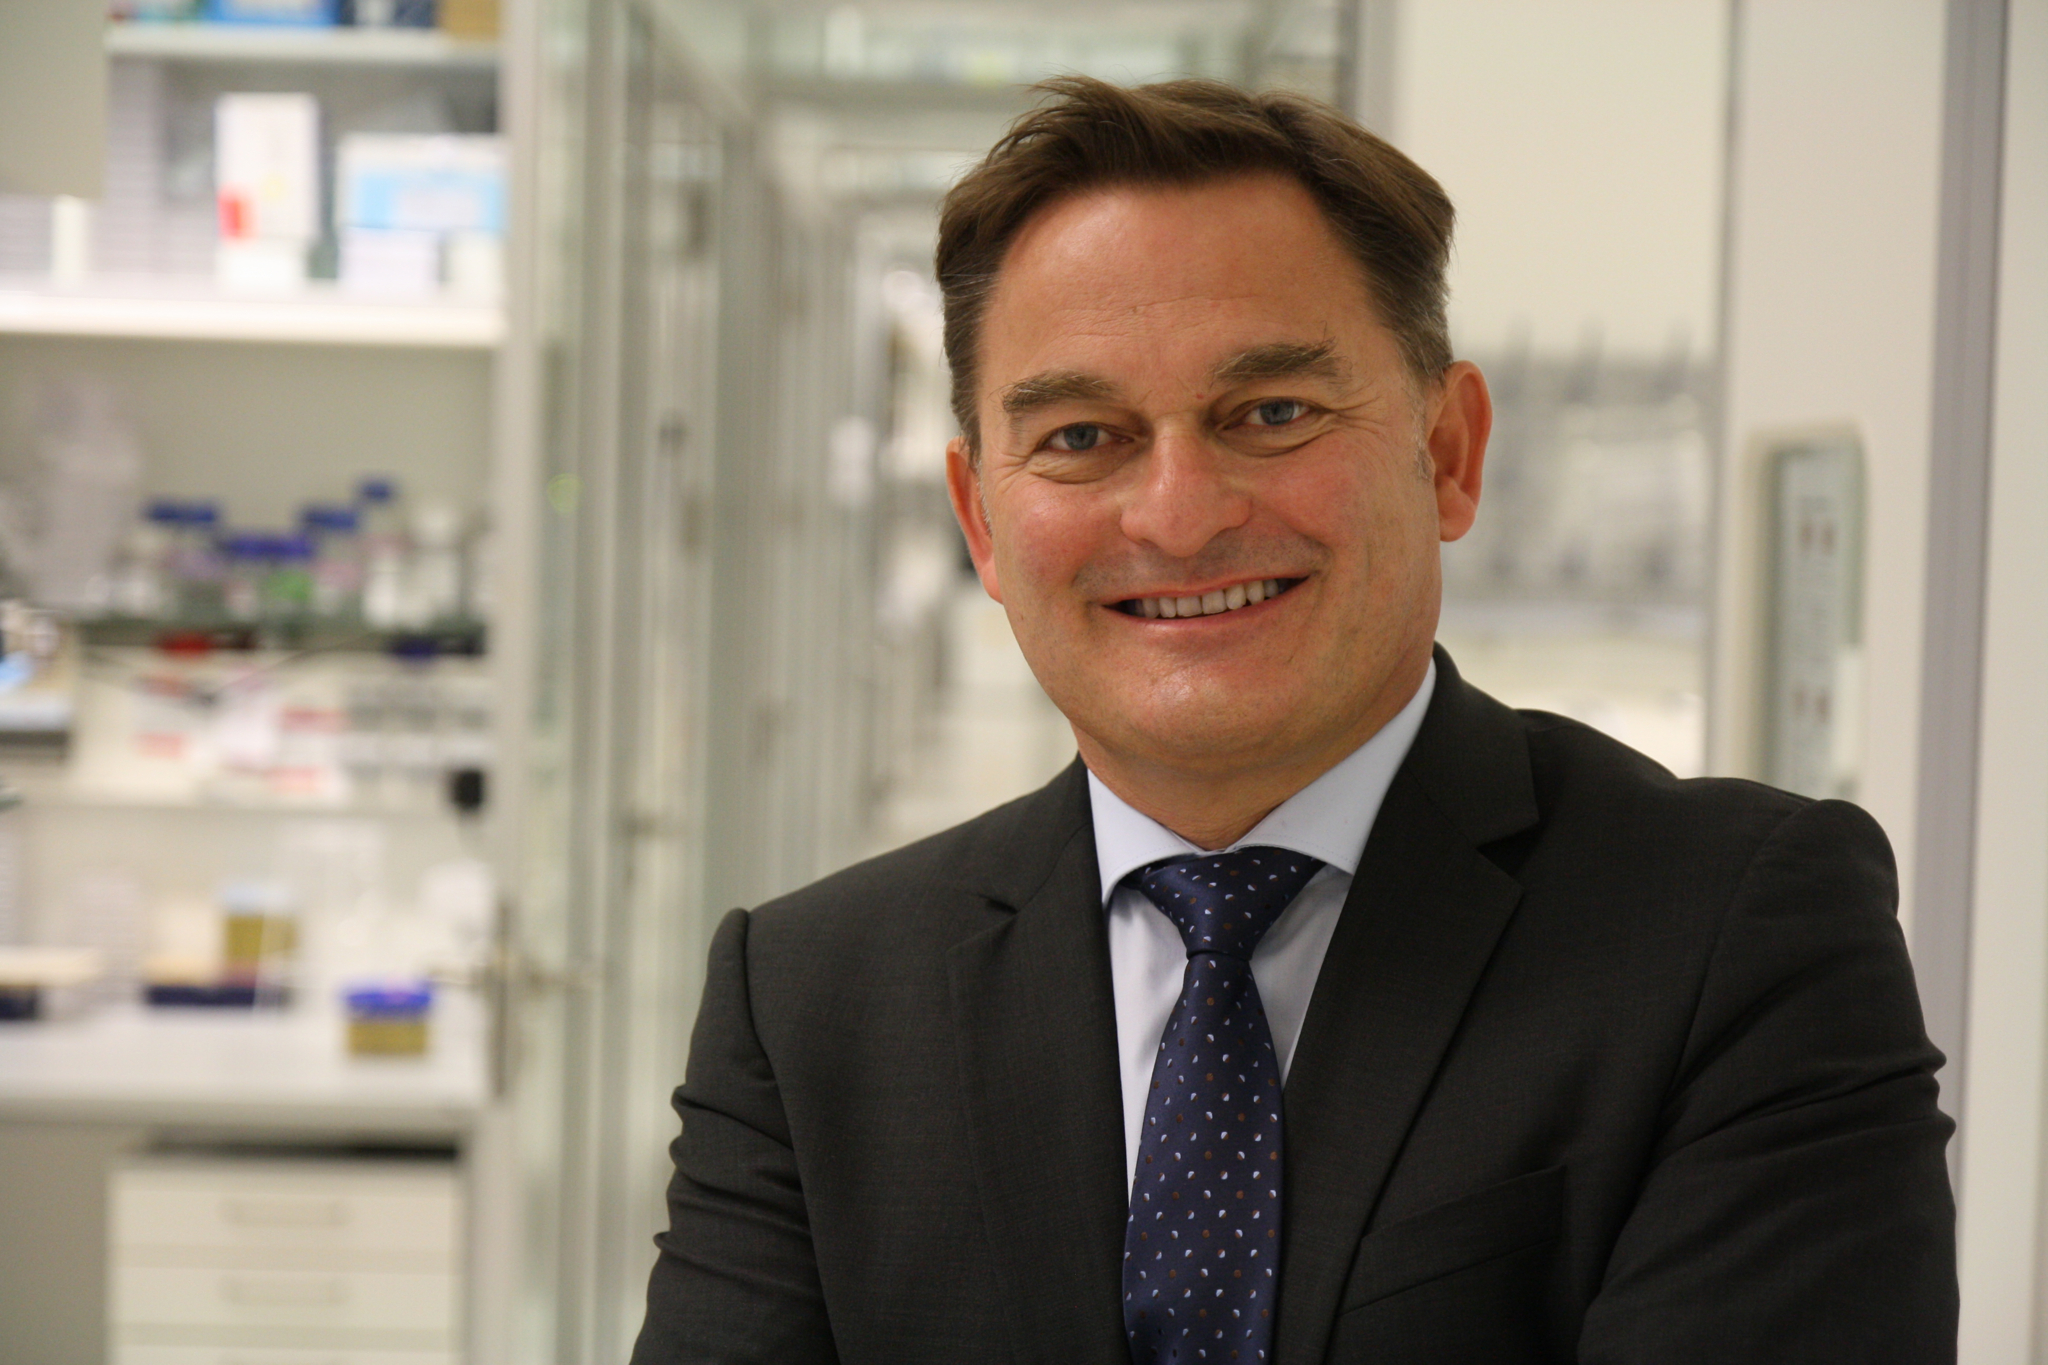 Stem cell researcher Prof. Dr. Andreas Trumpp from Heidelberg